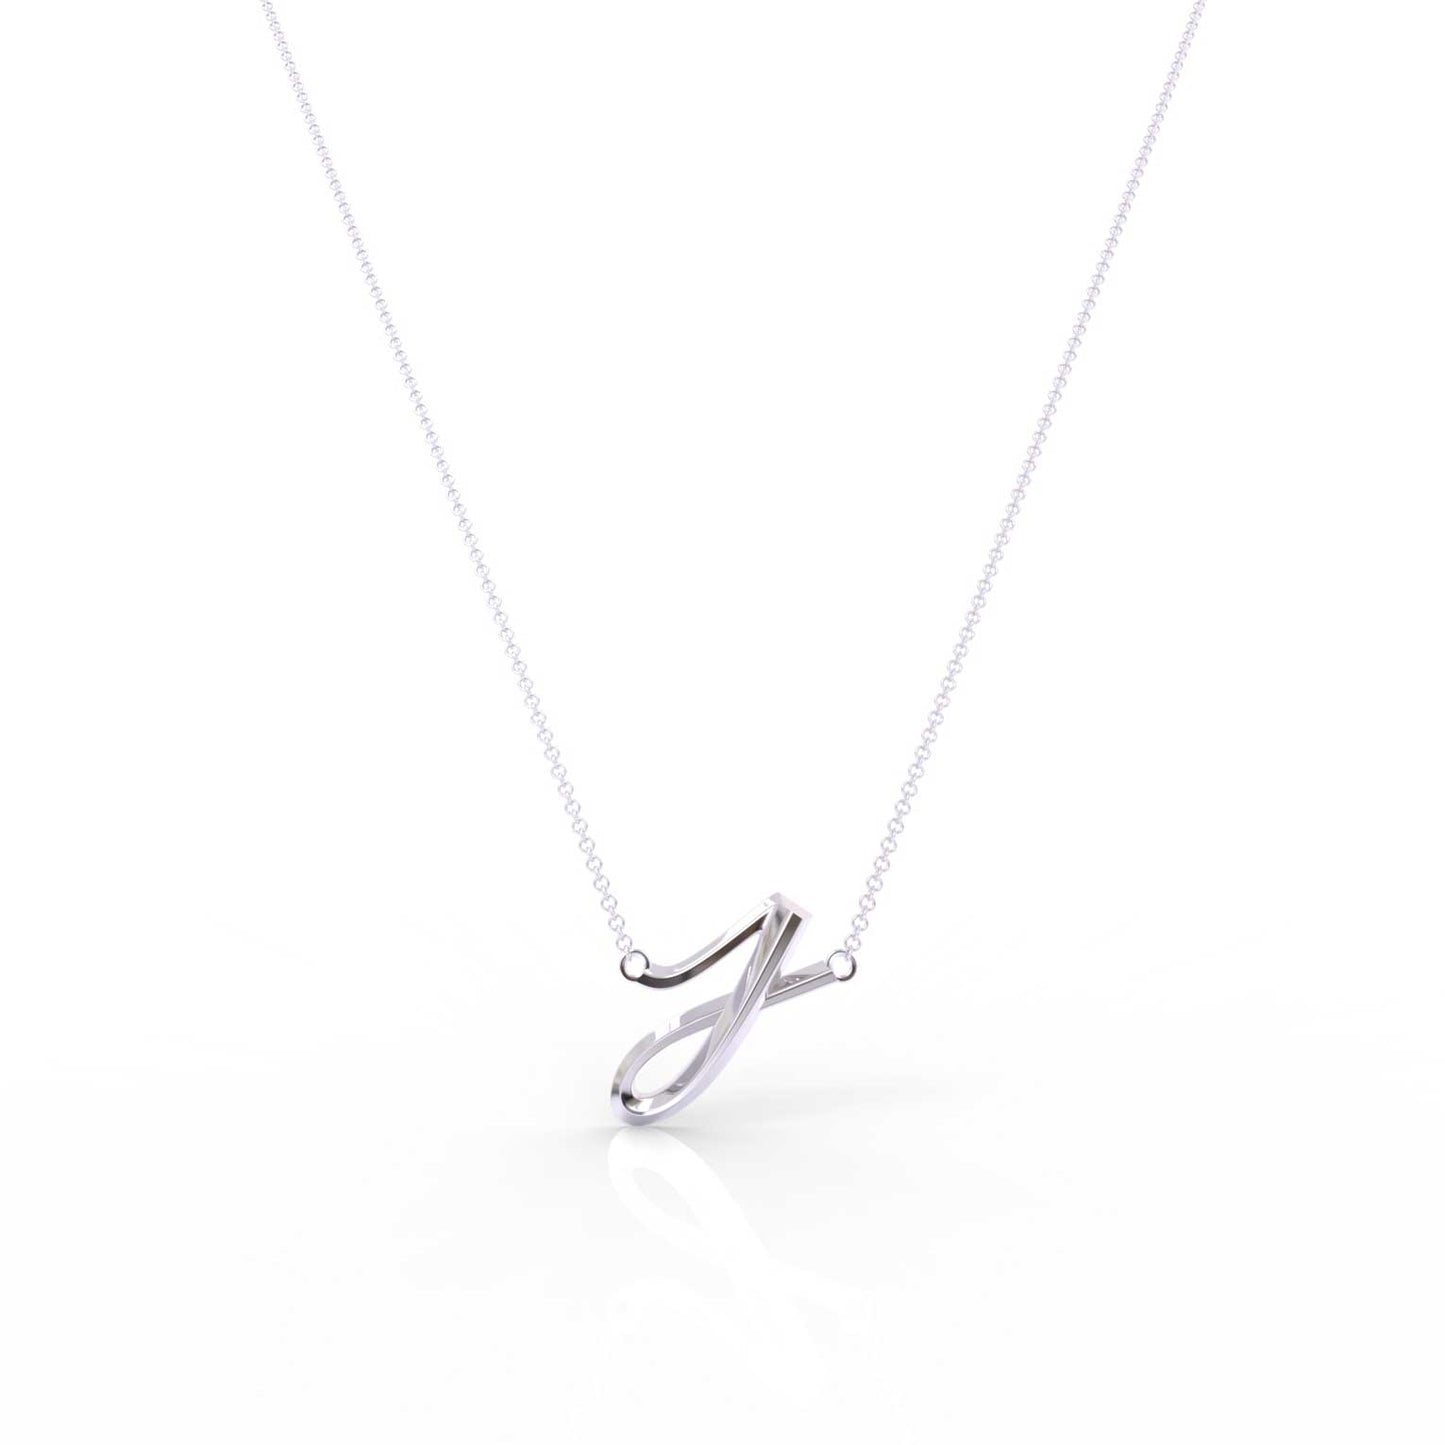 The Love Collect - "J" Necklace